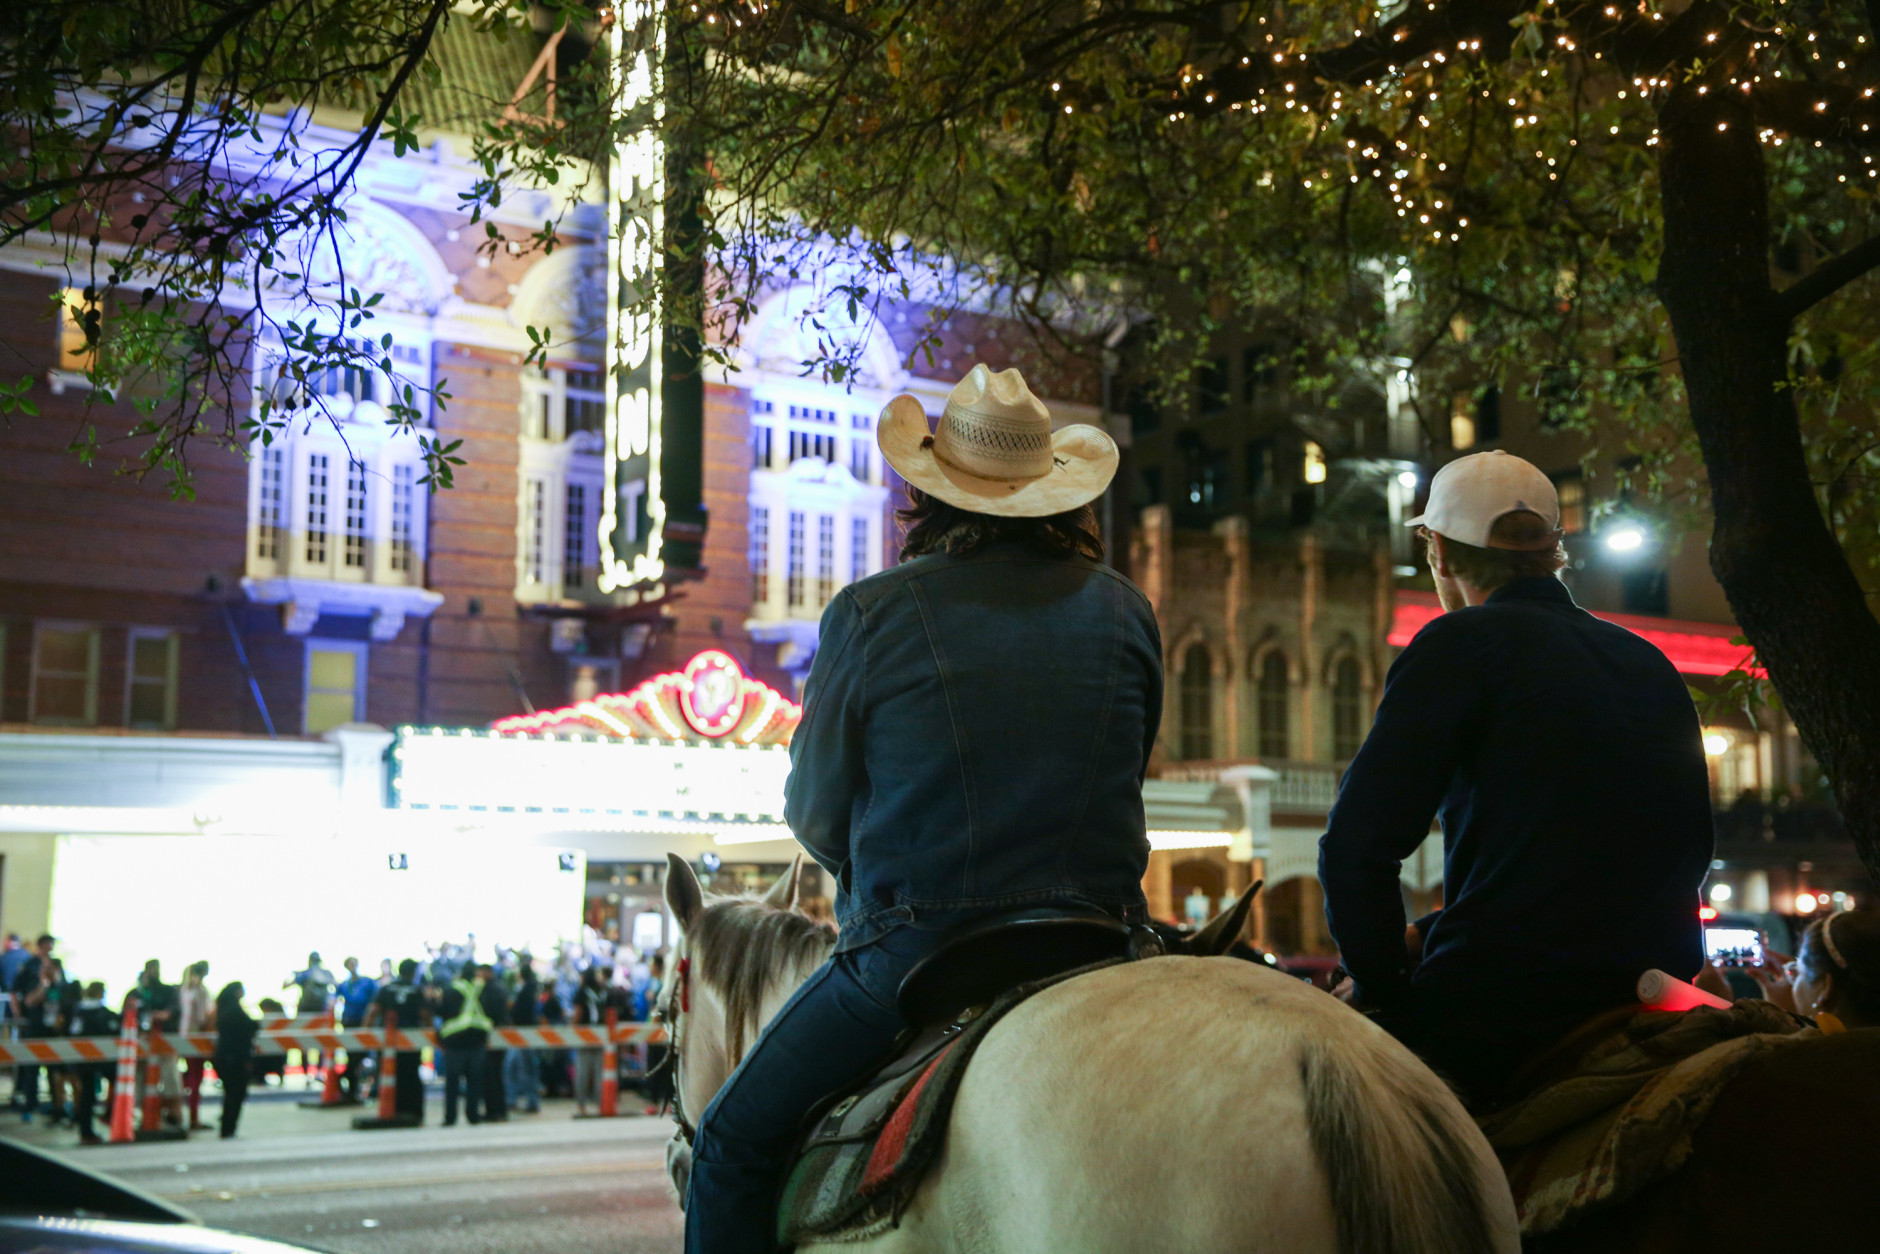 Men on horseback watch a film premiere taking place during South By Southwest on Saturday, March 12, 2016, in Austin, Texas. (Photo by Rich Fury/Invision/AP